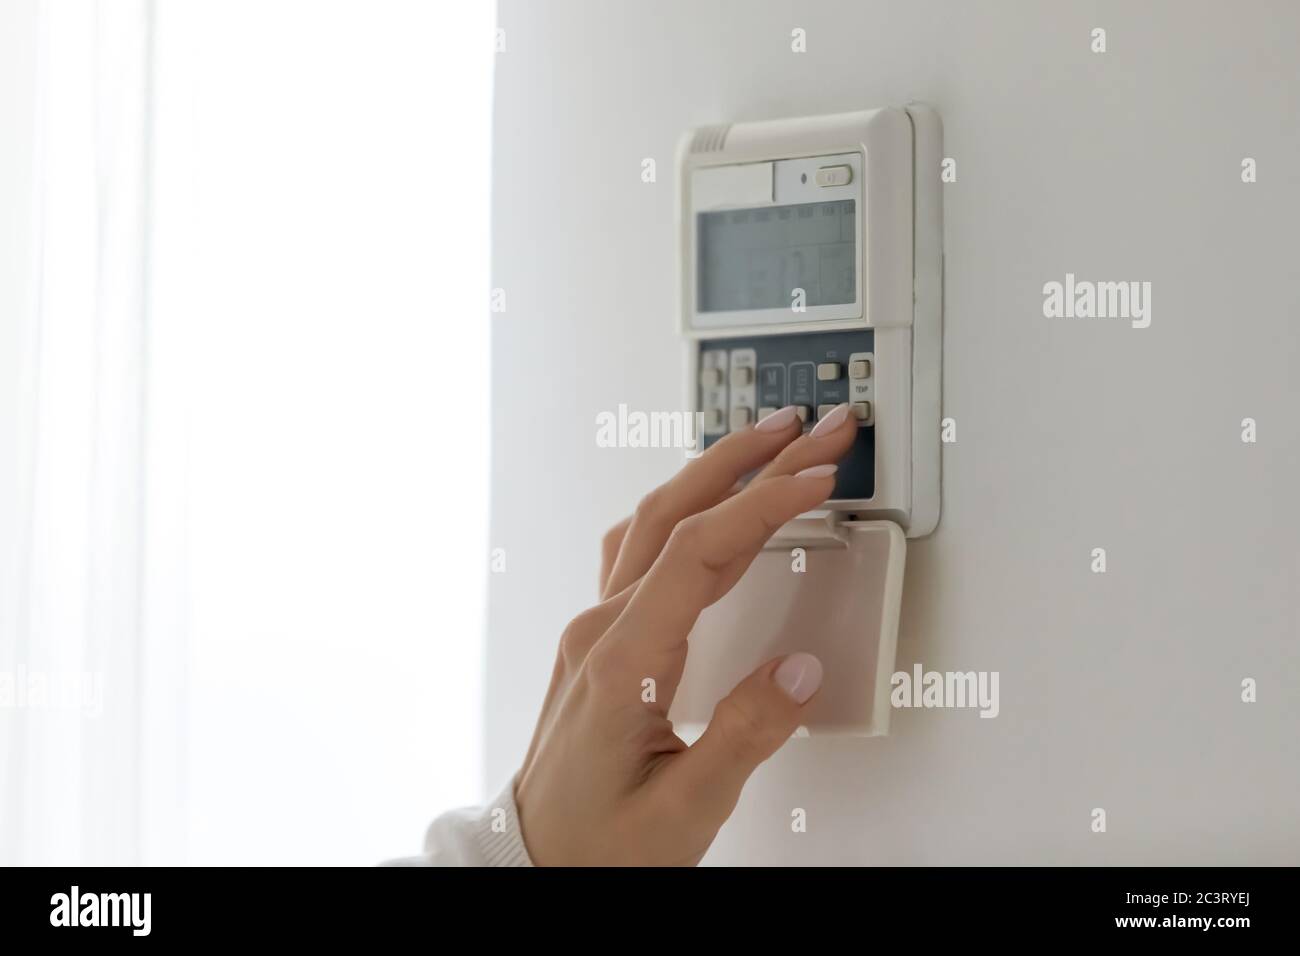 Female fingers set comfortable temperature at home use digital thermostat Stock Photo